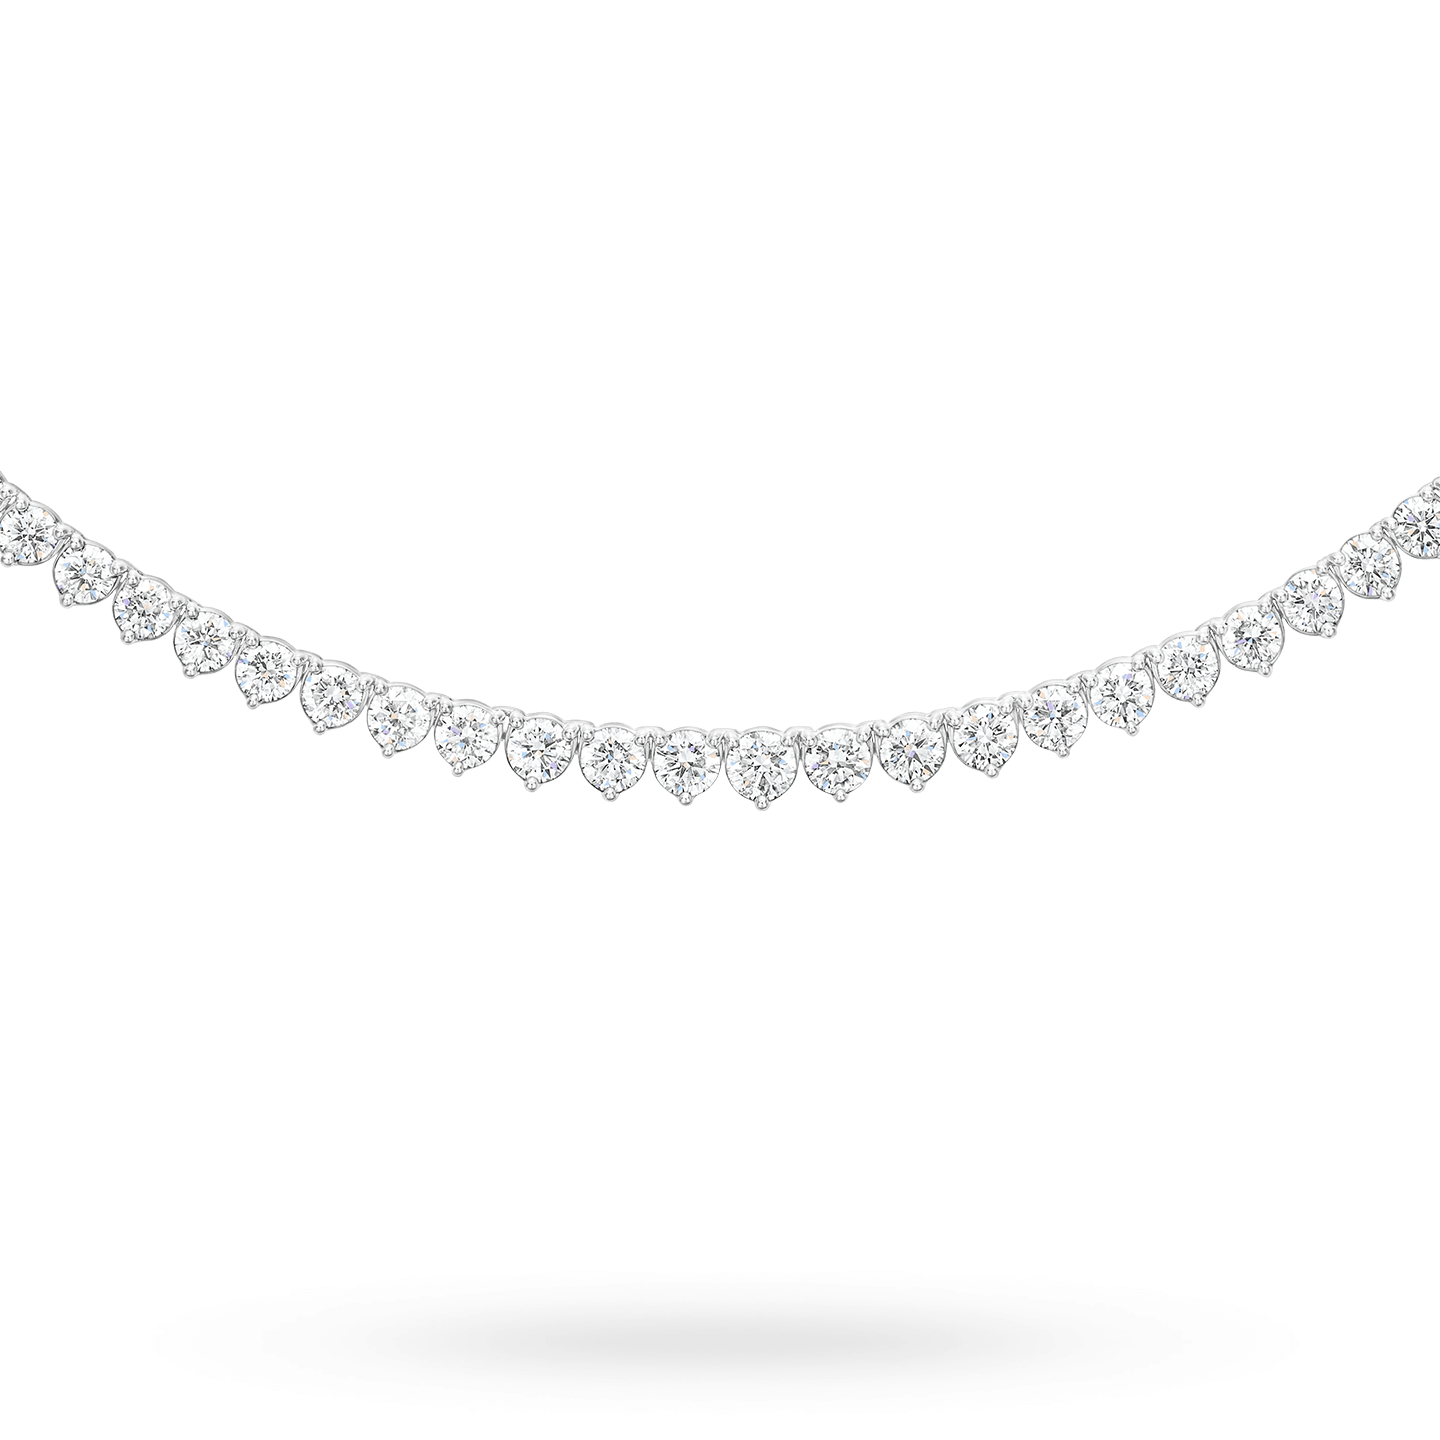 Necklace by Harry Winston